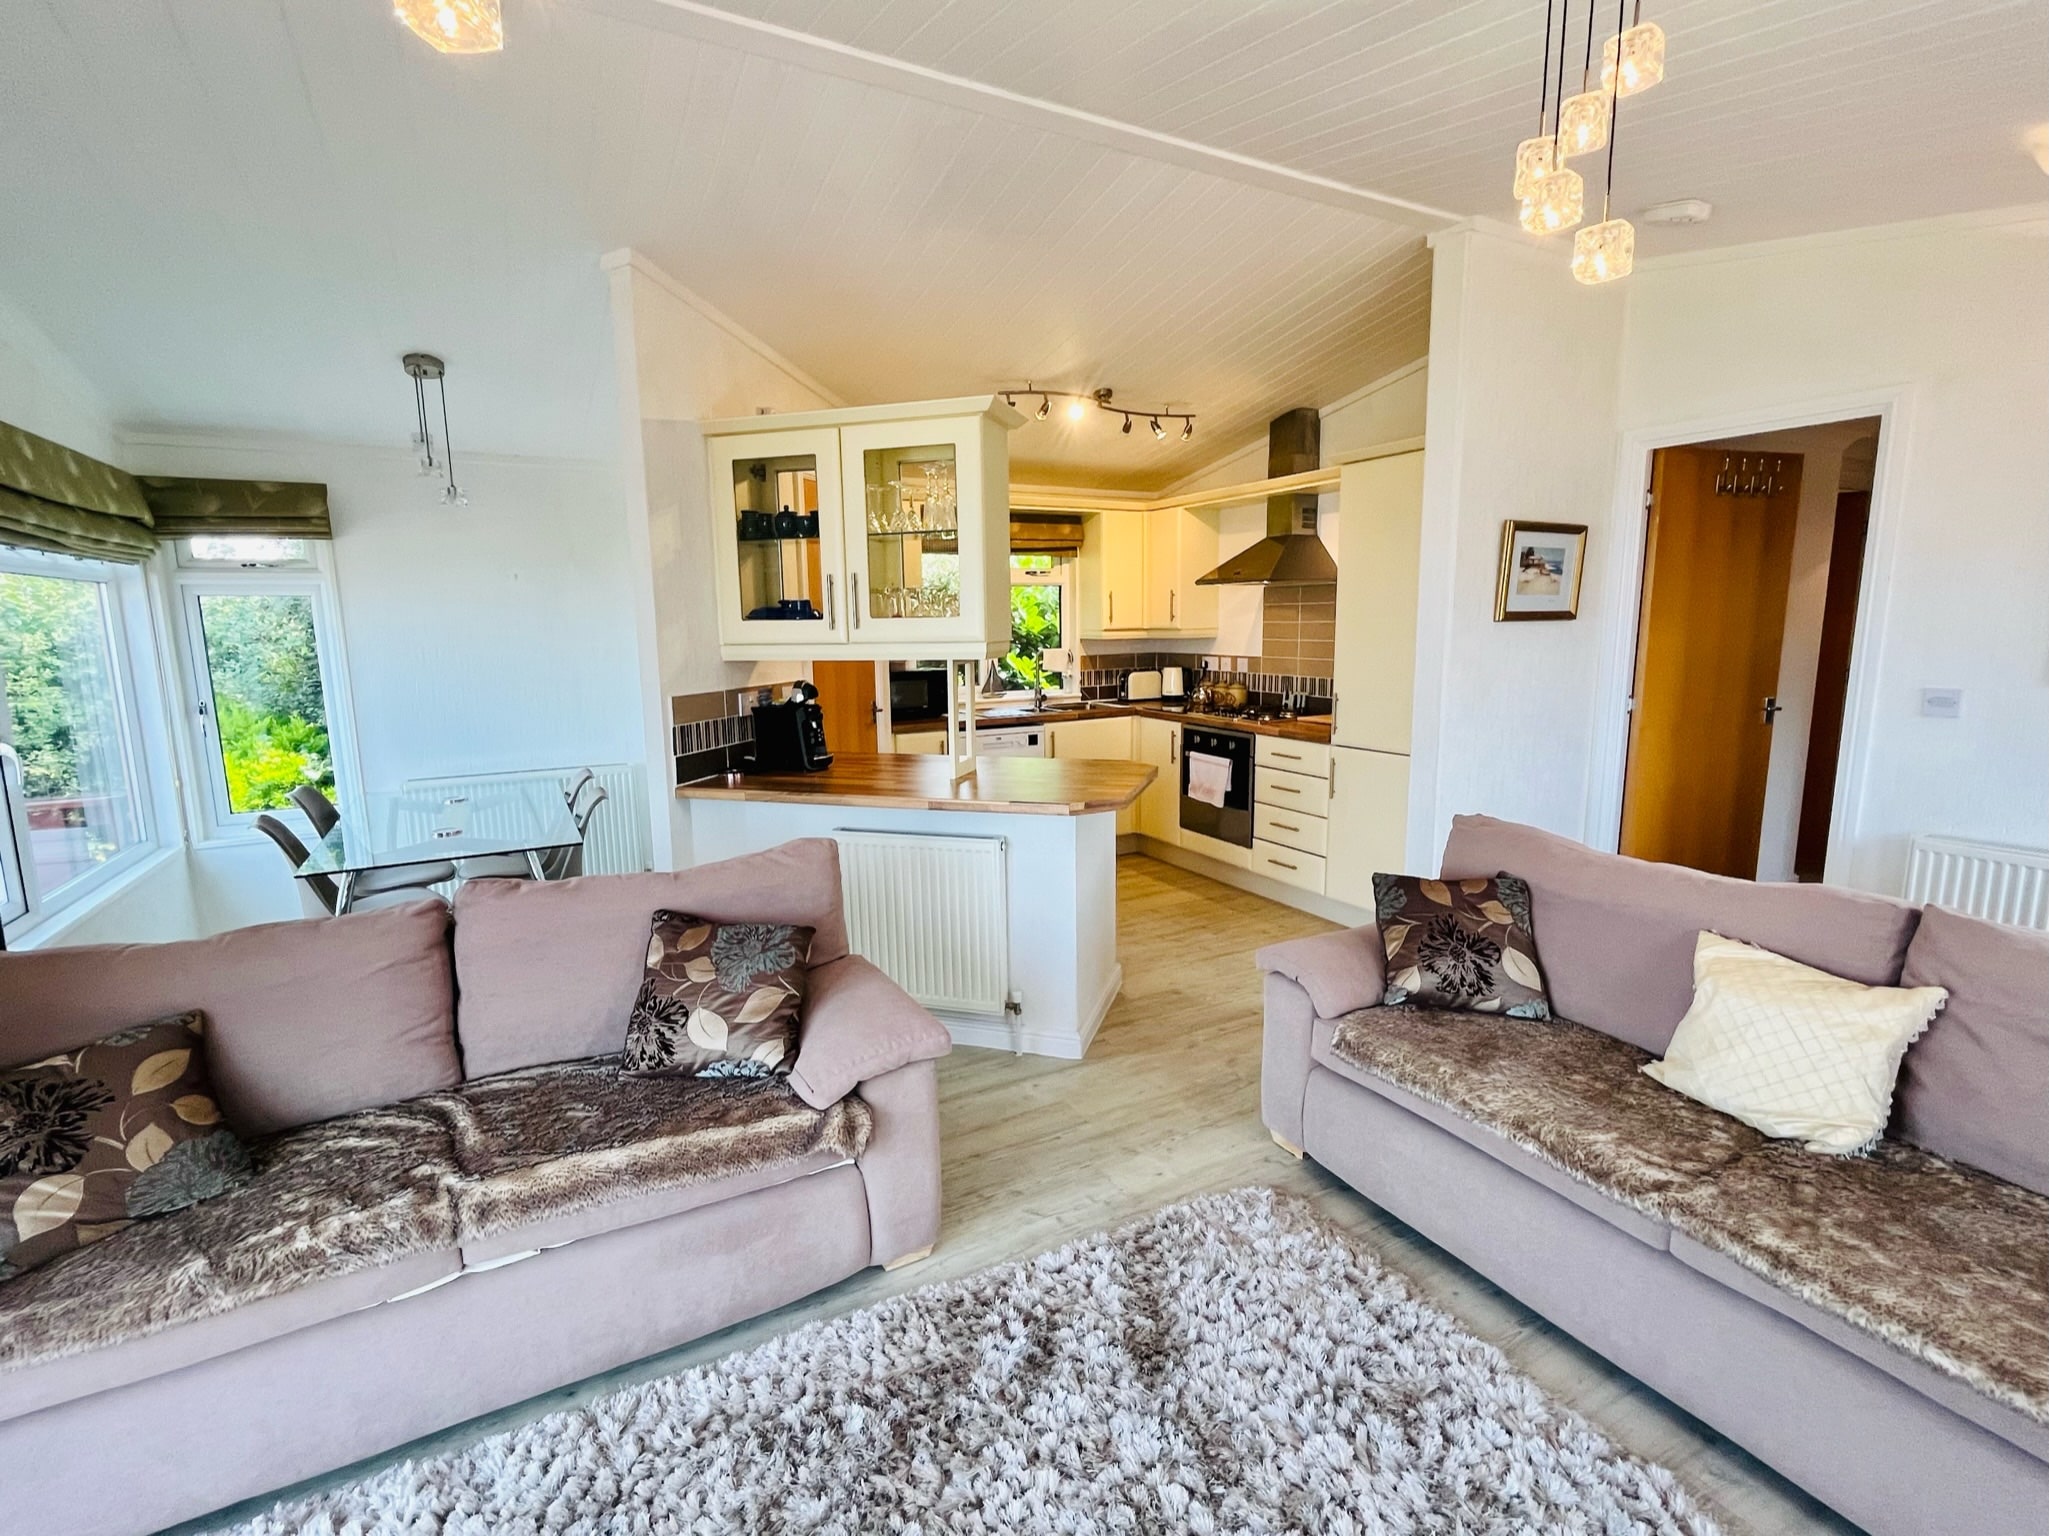 Luxury lodge for sale at St Audries Bay Holiday Club, Somerset